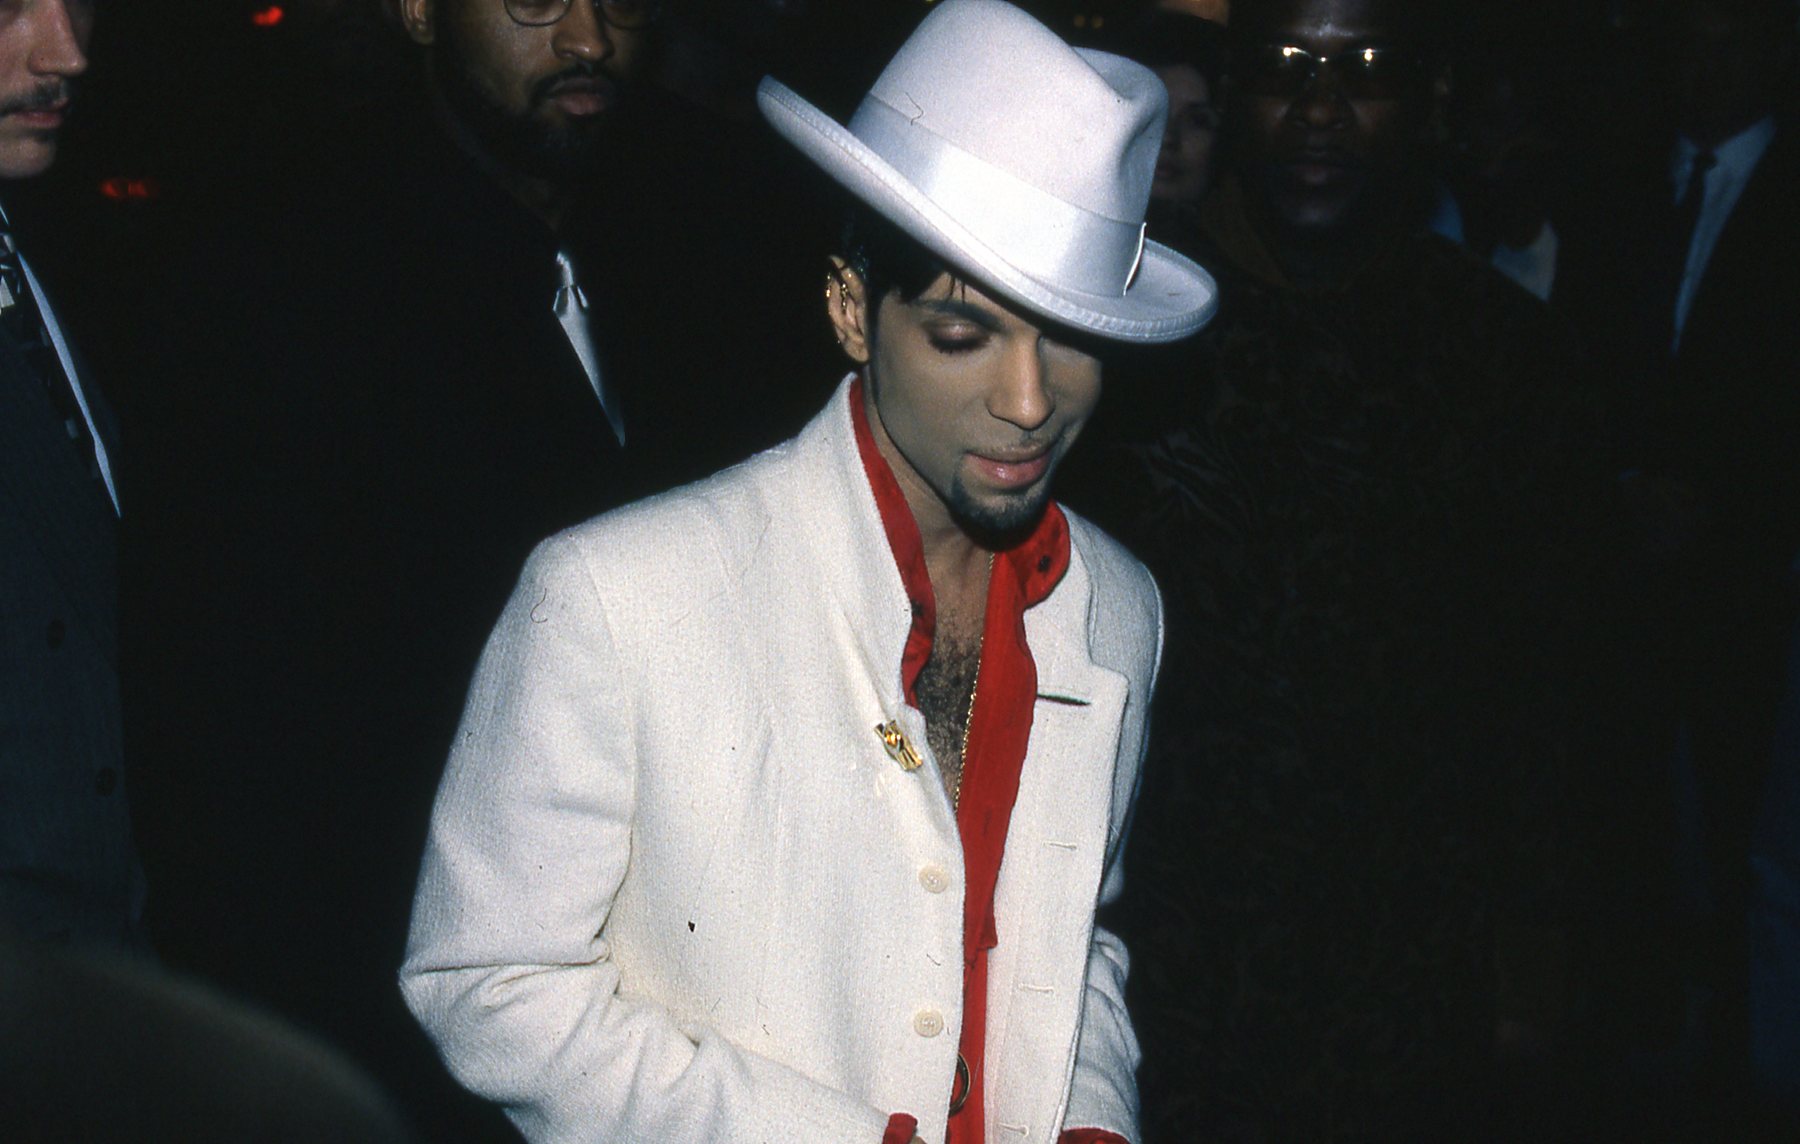 American musician Prince (1958 - 2016) arrives at the Life Cafe for a Grammy Awards afterparty, New York, New York, February 27, 1997.